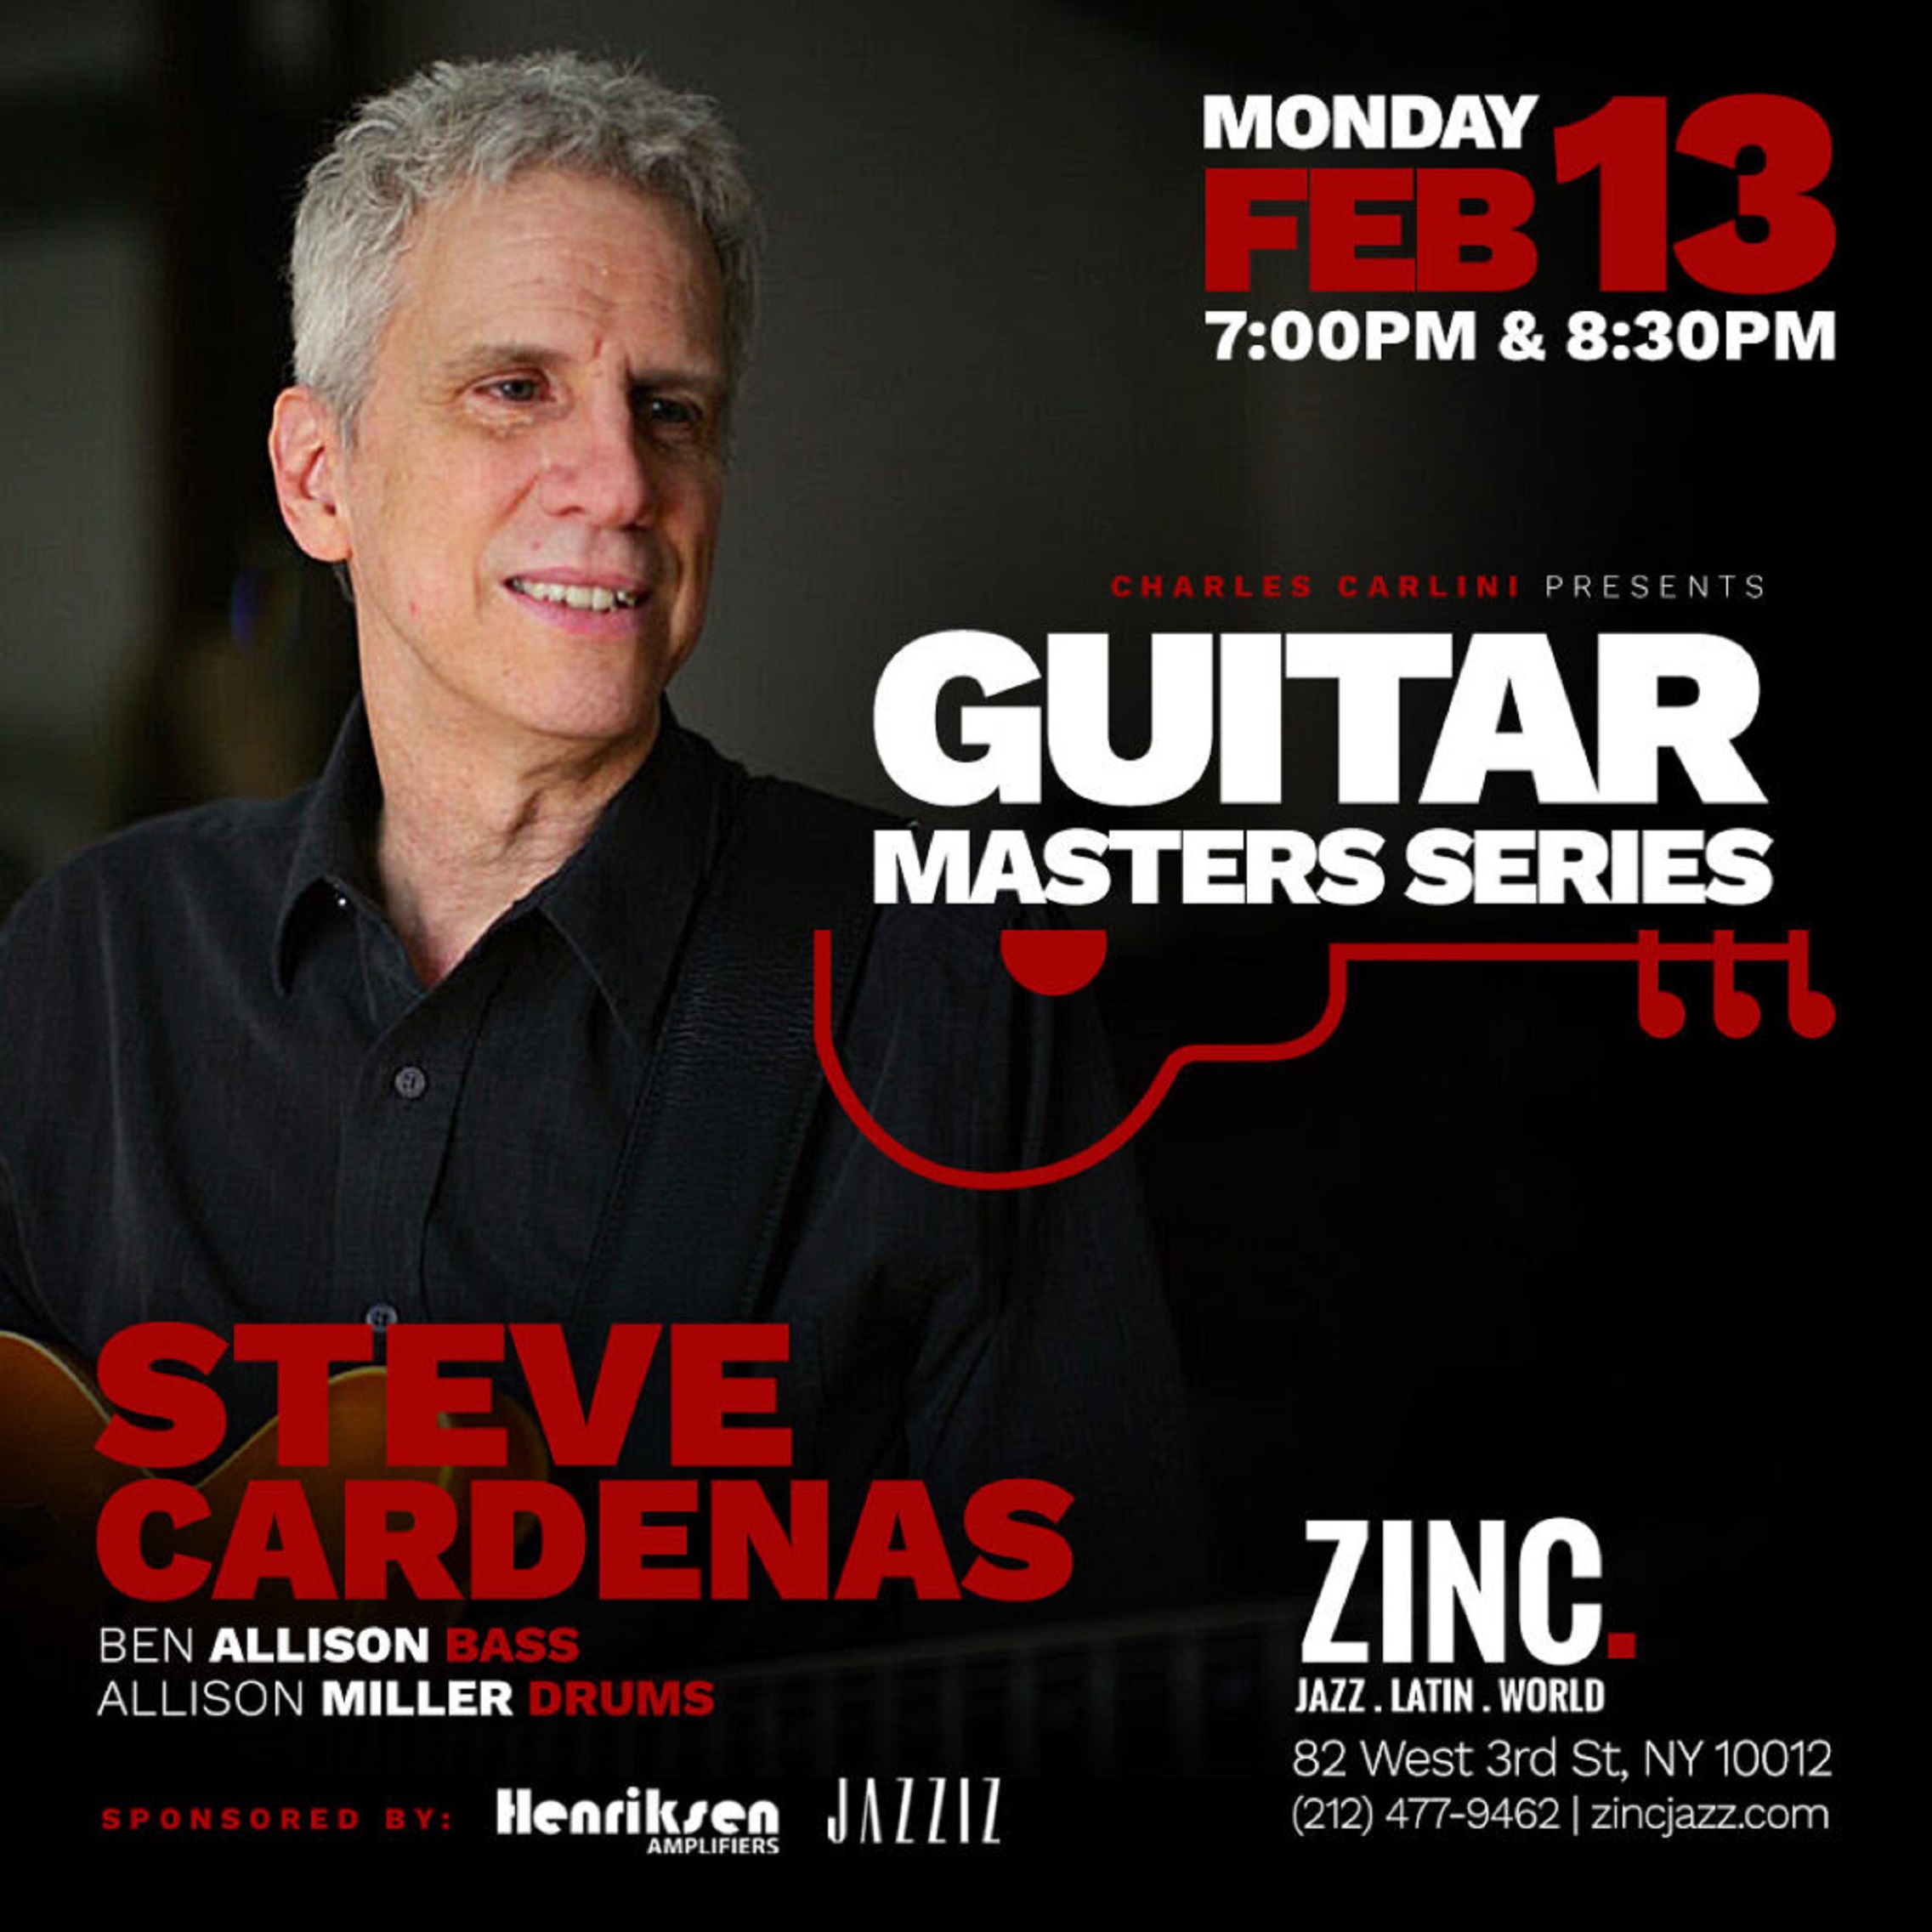 Catch Acclaimed Guitarist Steve Cardenas at Zinc on Monday, February 13